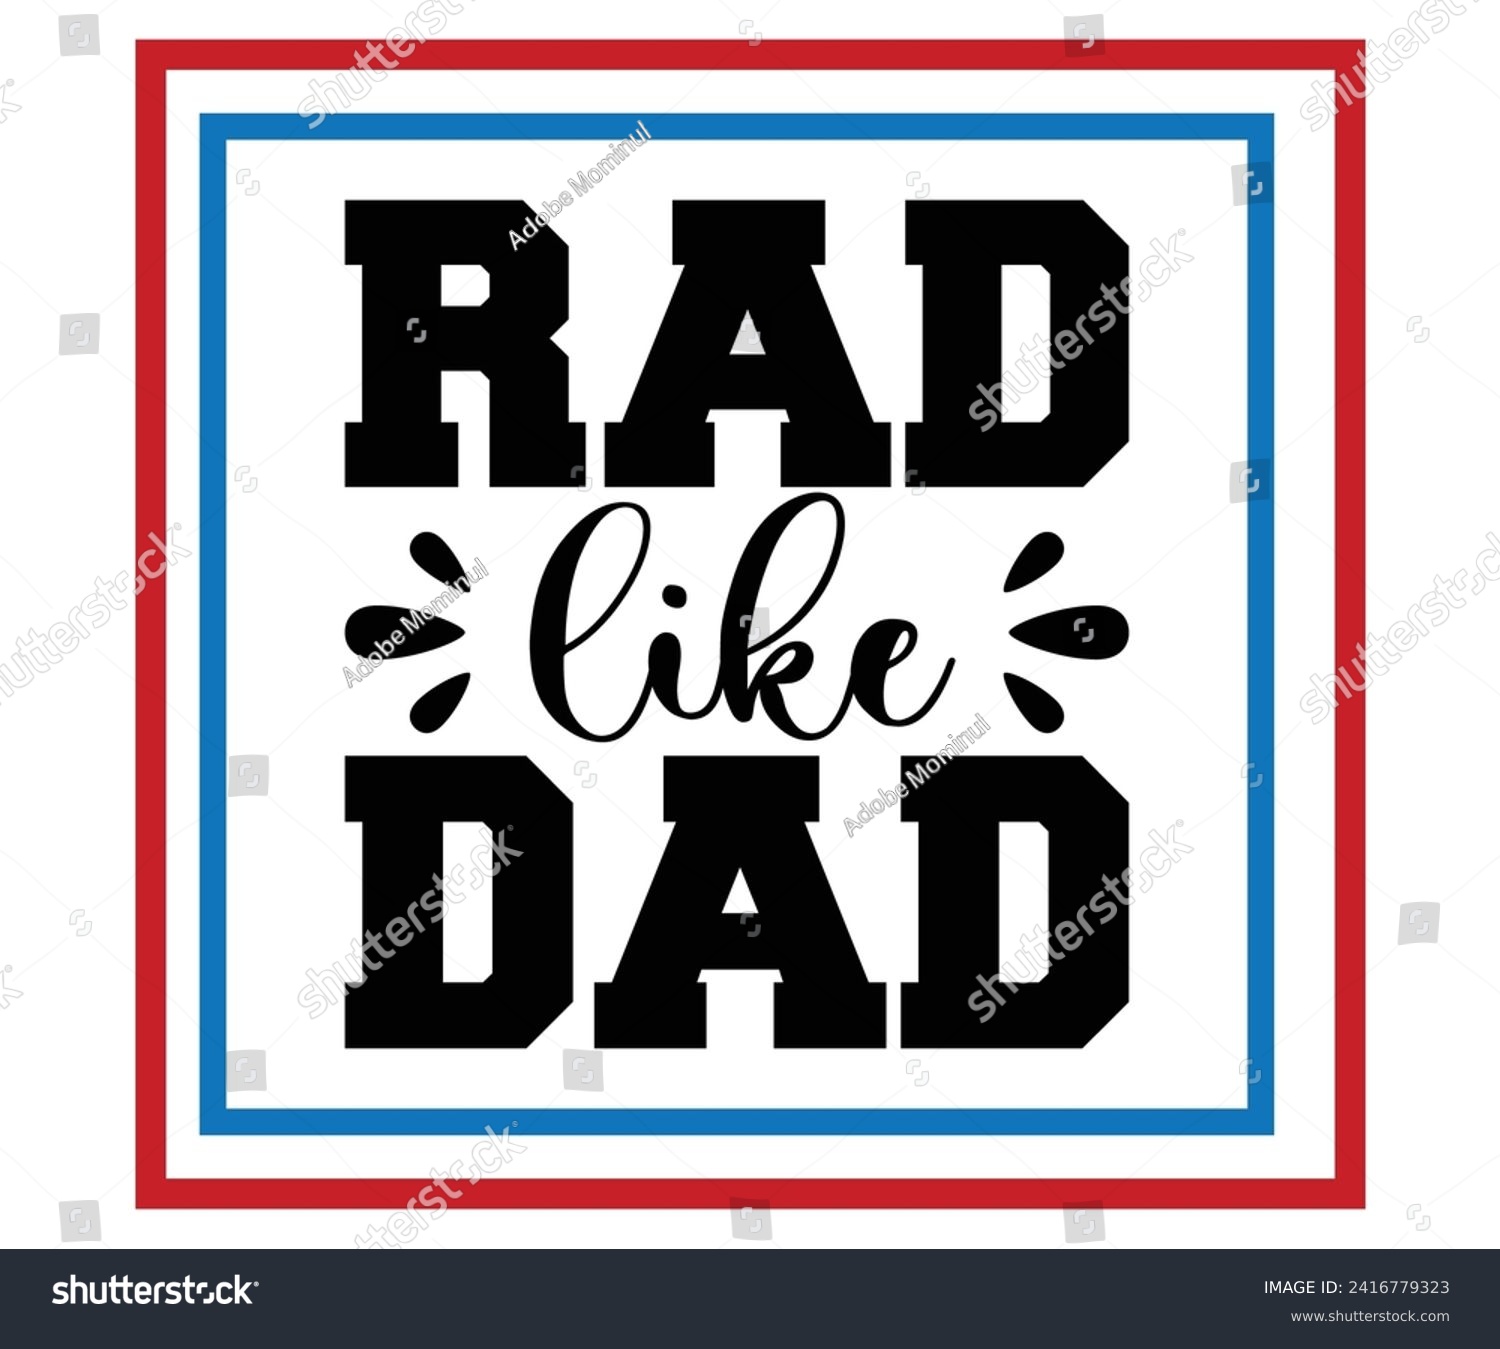 SVG of Rad Like Dad Svg,Retro,Father's Day Svg,Papa svg,Grandpa Svg,Father's Day Saying Qoutes,Dad Svg,Funny Father, Gift For Dad Svg,Daddy Svg,Family Svg,T shirt Design,Svg Cut File,Typography svg